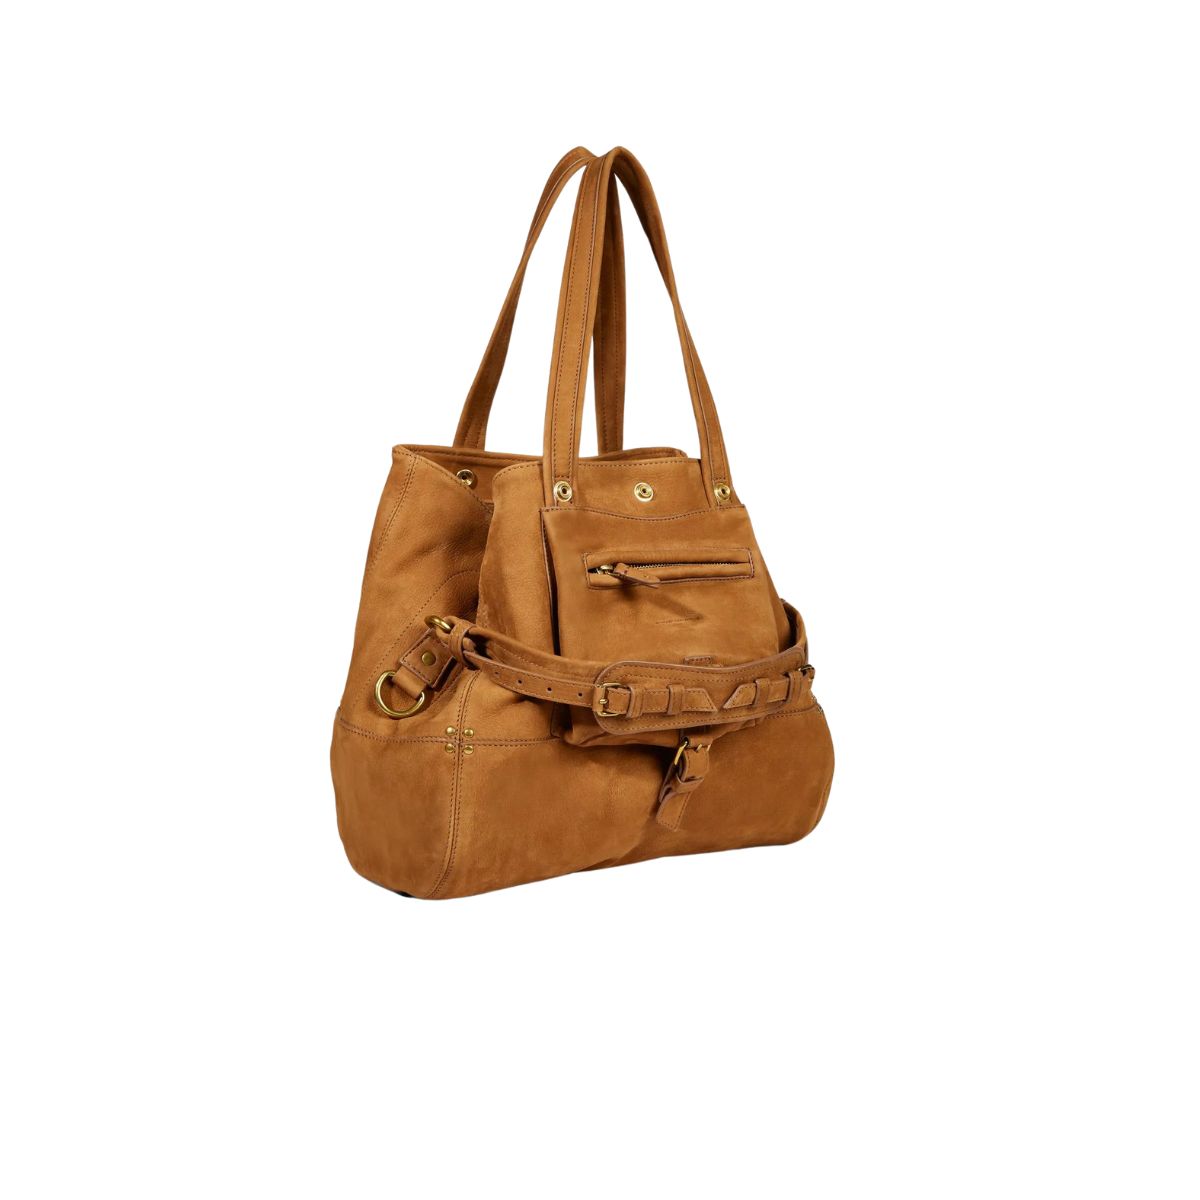 Jerome Dreyfuss Billy M Tote in Tabac Taurillion